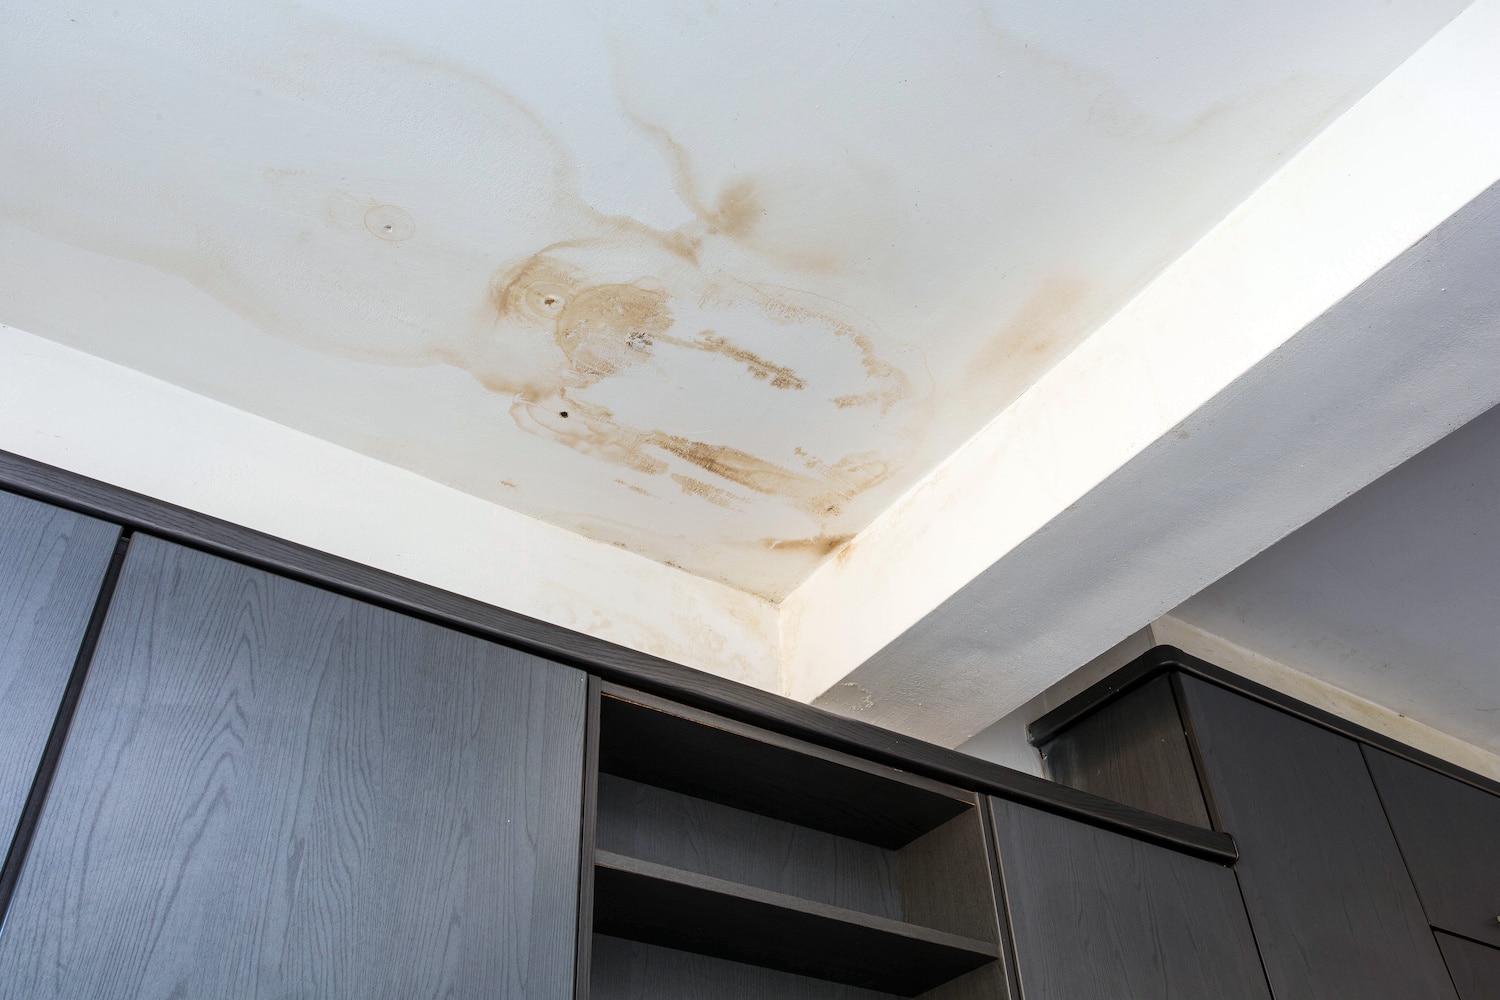 water damage from a leaking roof discoloration